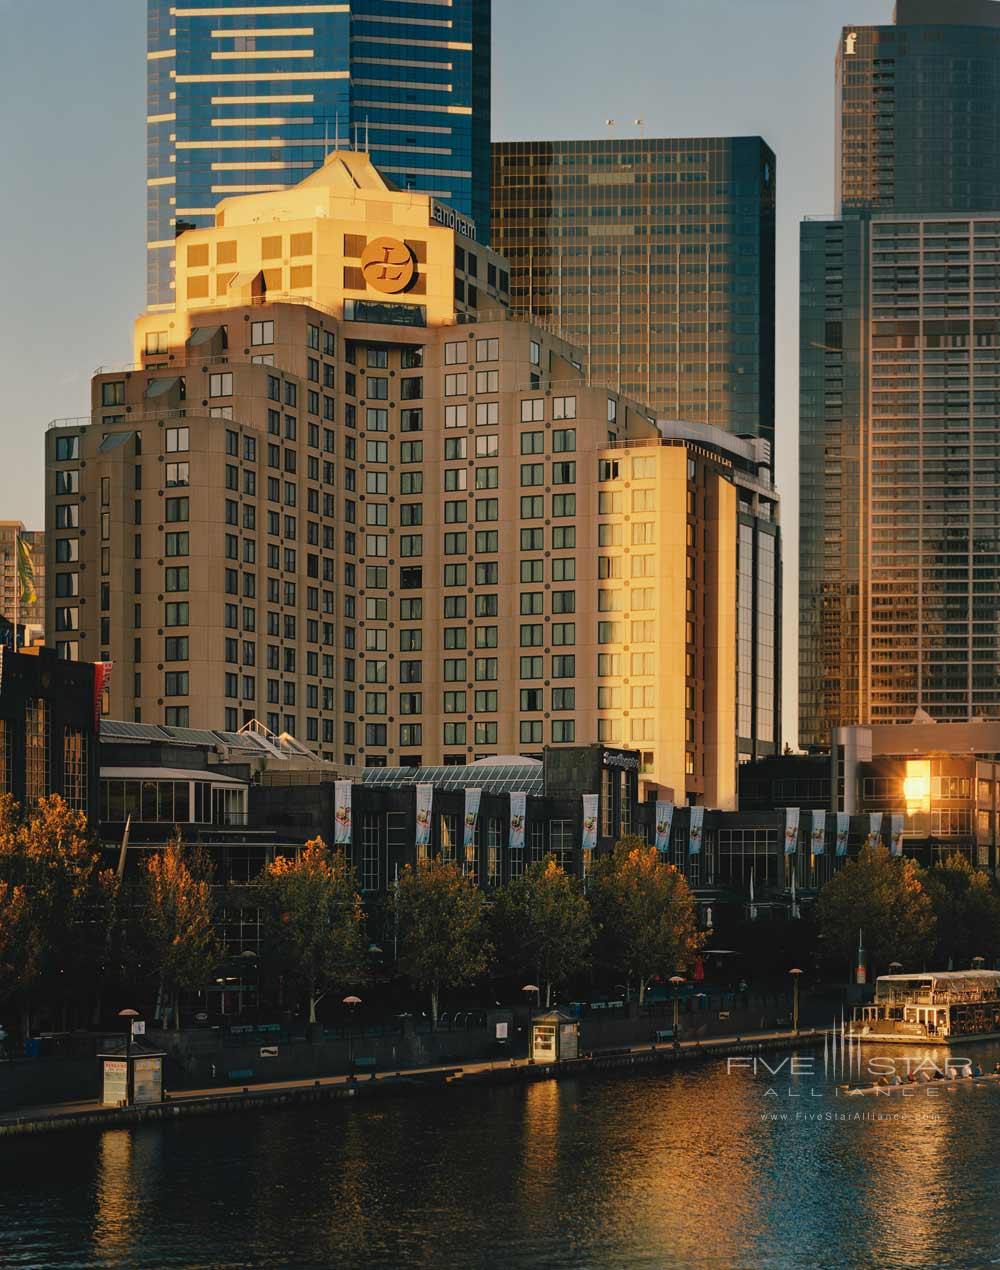 Exterior Of The Langham Hotel Melbourne From The Nearby River.